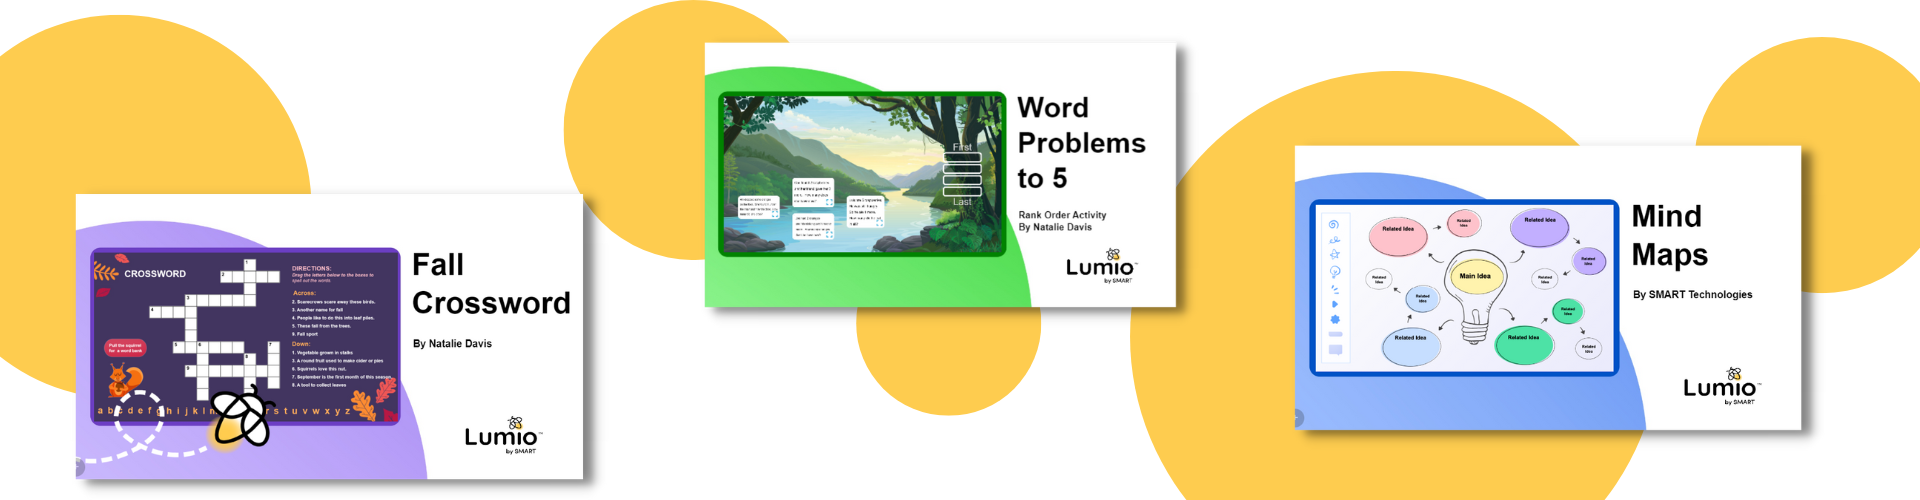 Lumio logo with it's integrations - YouTube, PhET Simulations, Desmos and Game-Based Activities.